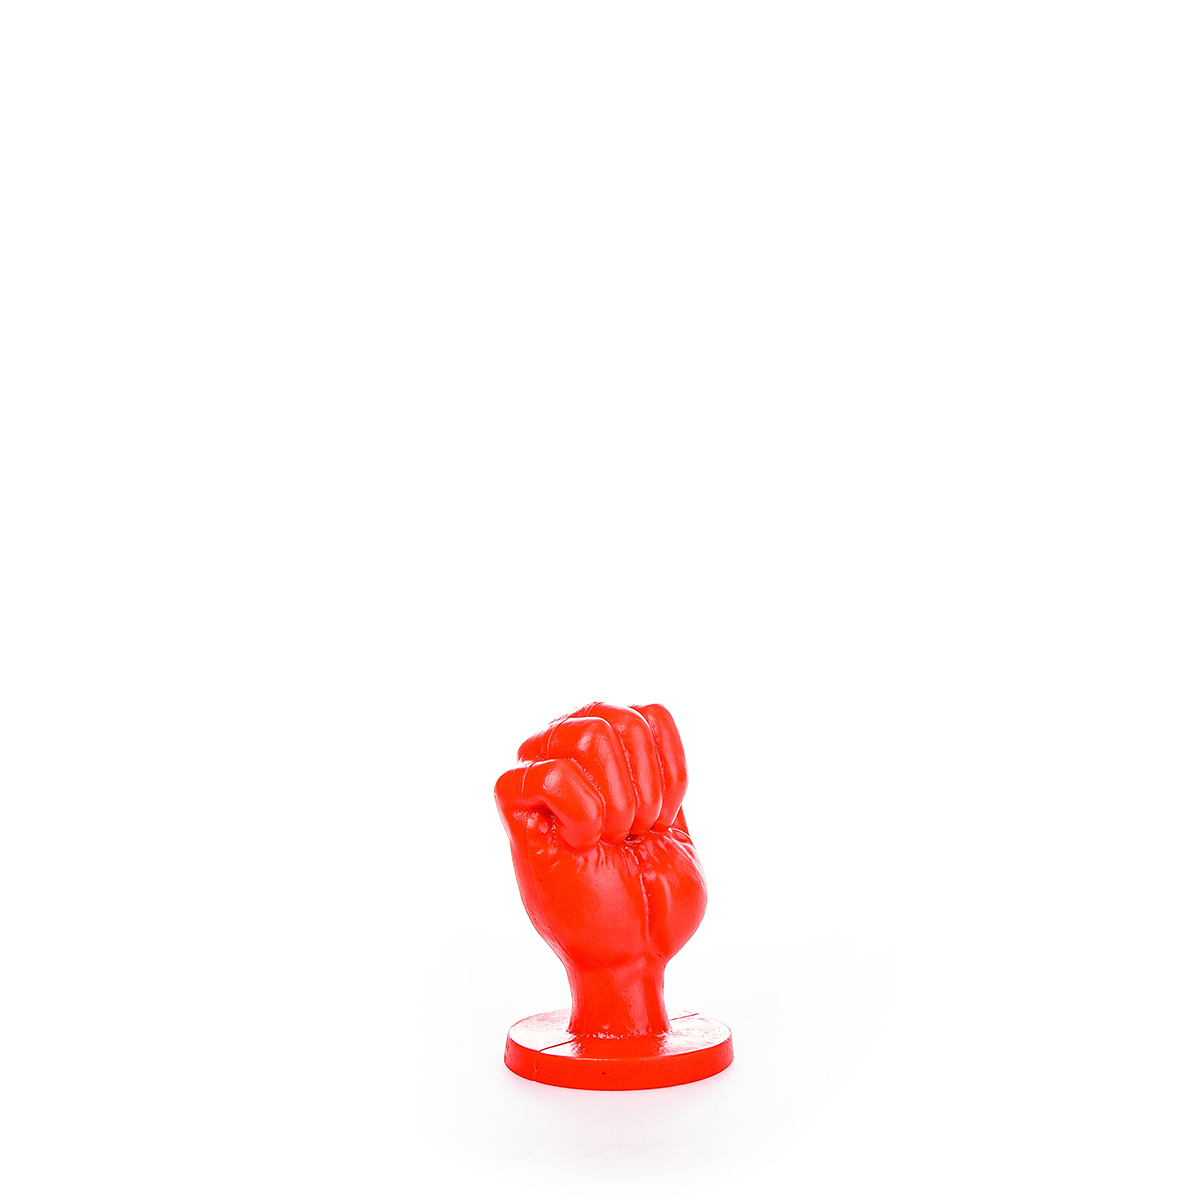 All-Red-Fist-Small-ABR92-115-ABR92-5